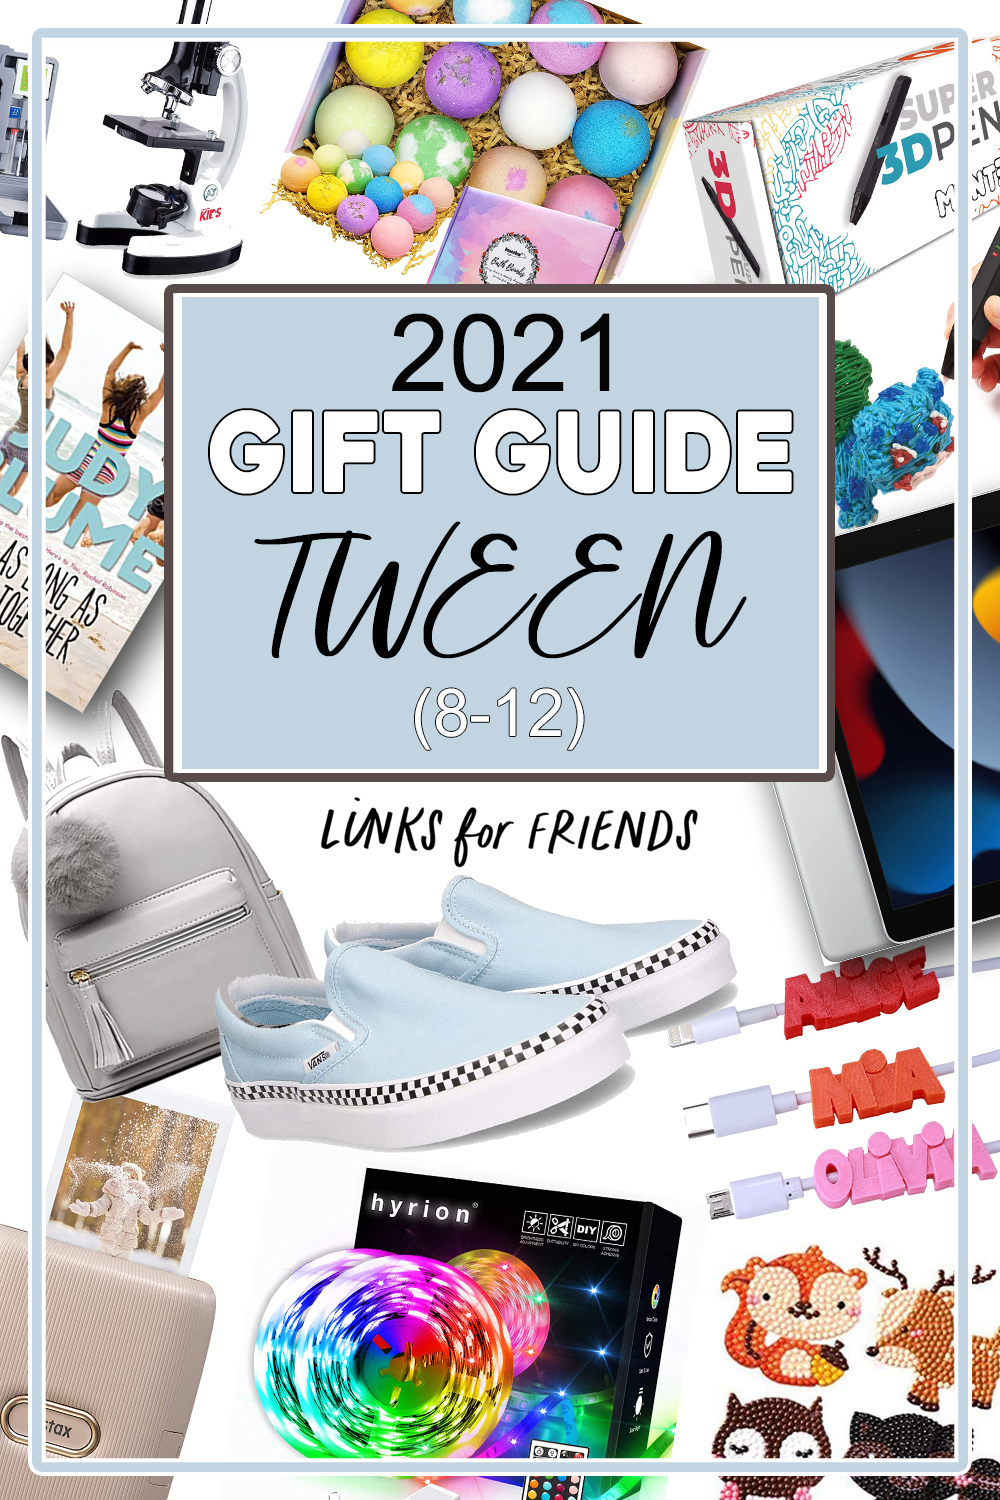 Tween Girls Gift Guide for ages 8 to 12